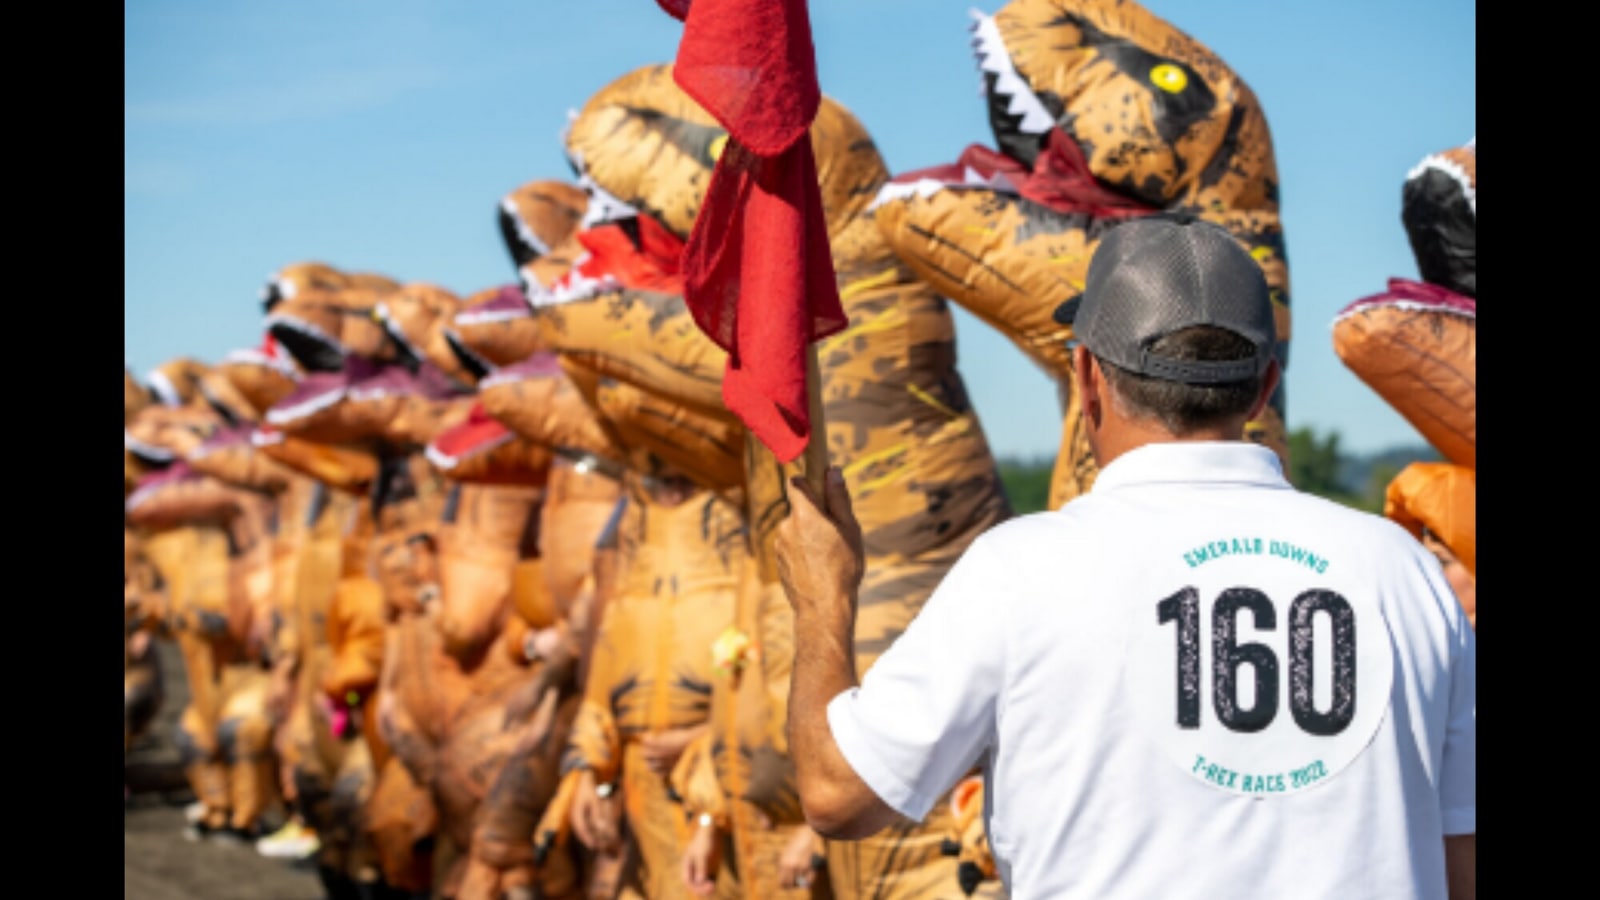 Have you ever seen 'dinosaurs' run races? It just happened in Washington